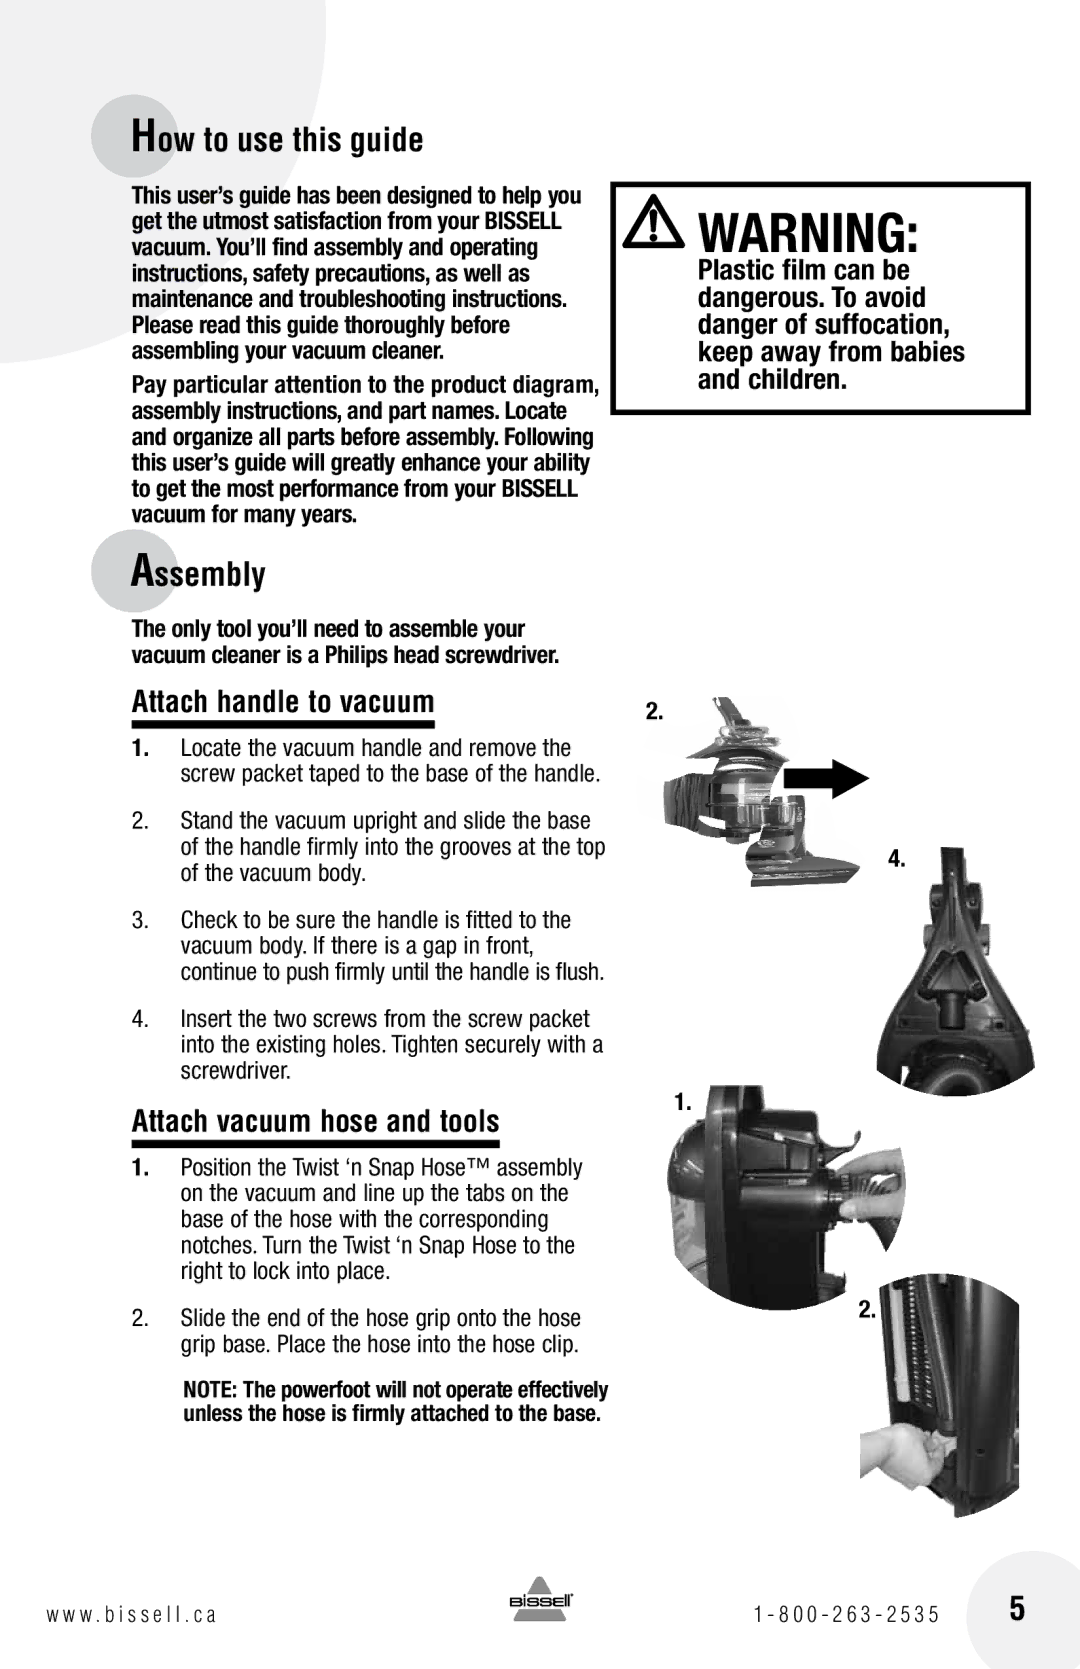 Bissell 18Z6 warranty How to use this guide, Assembly, Attach handle to vacuum, Attach vacuum hose and tools, Vacuum body 